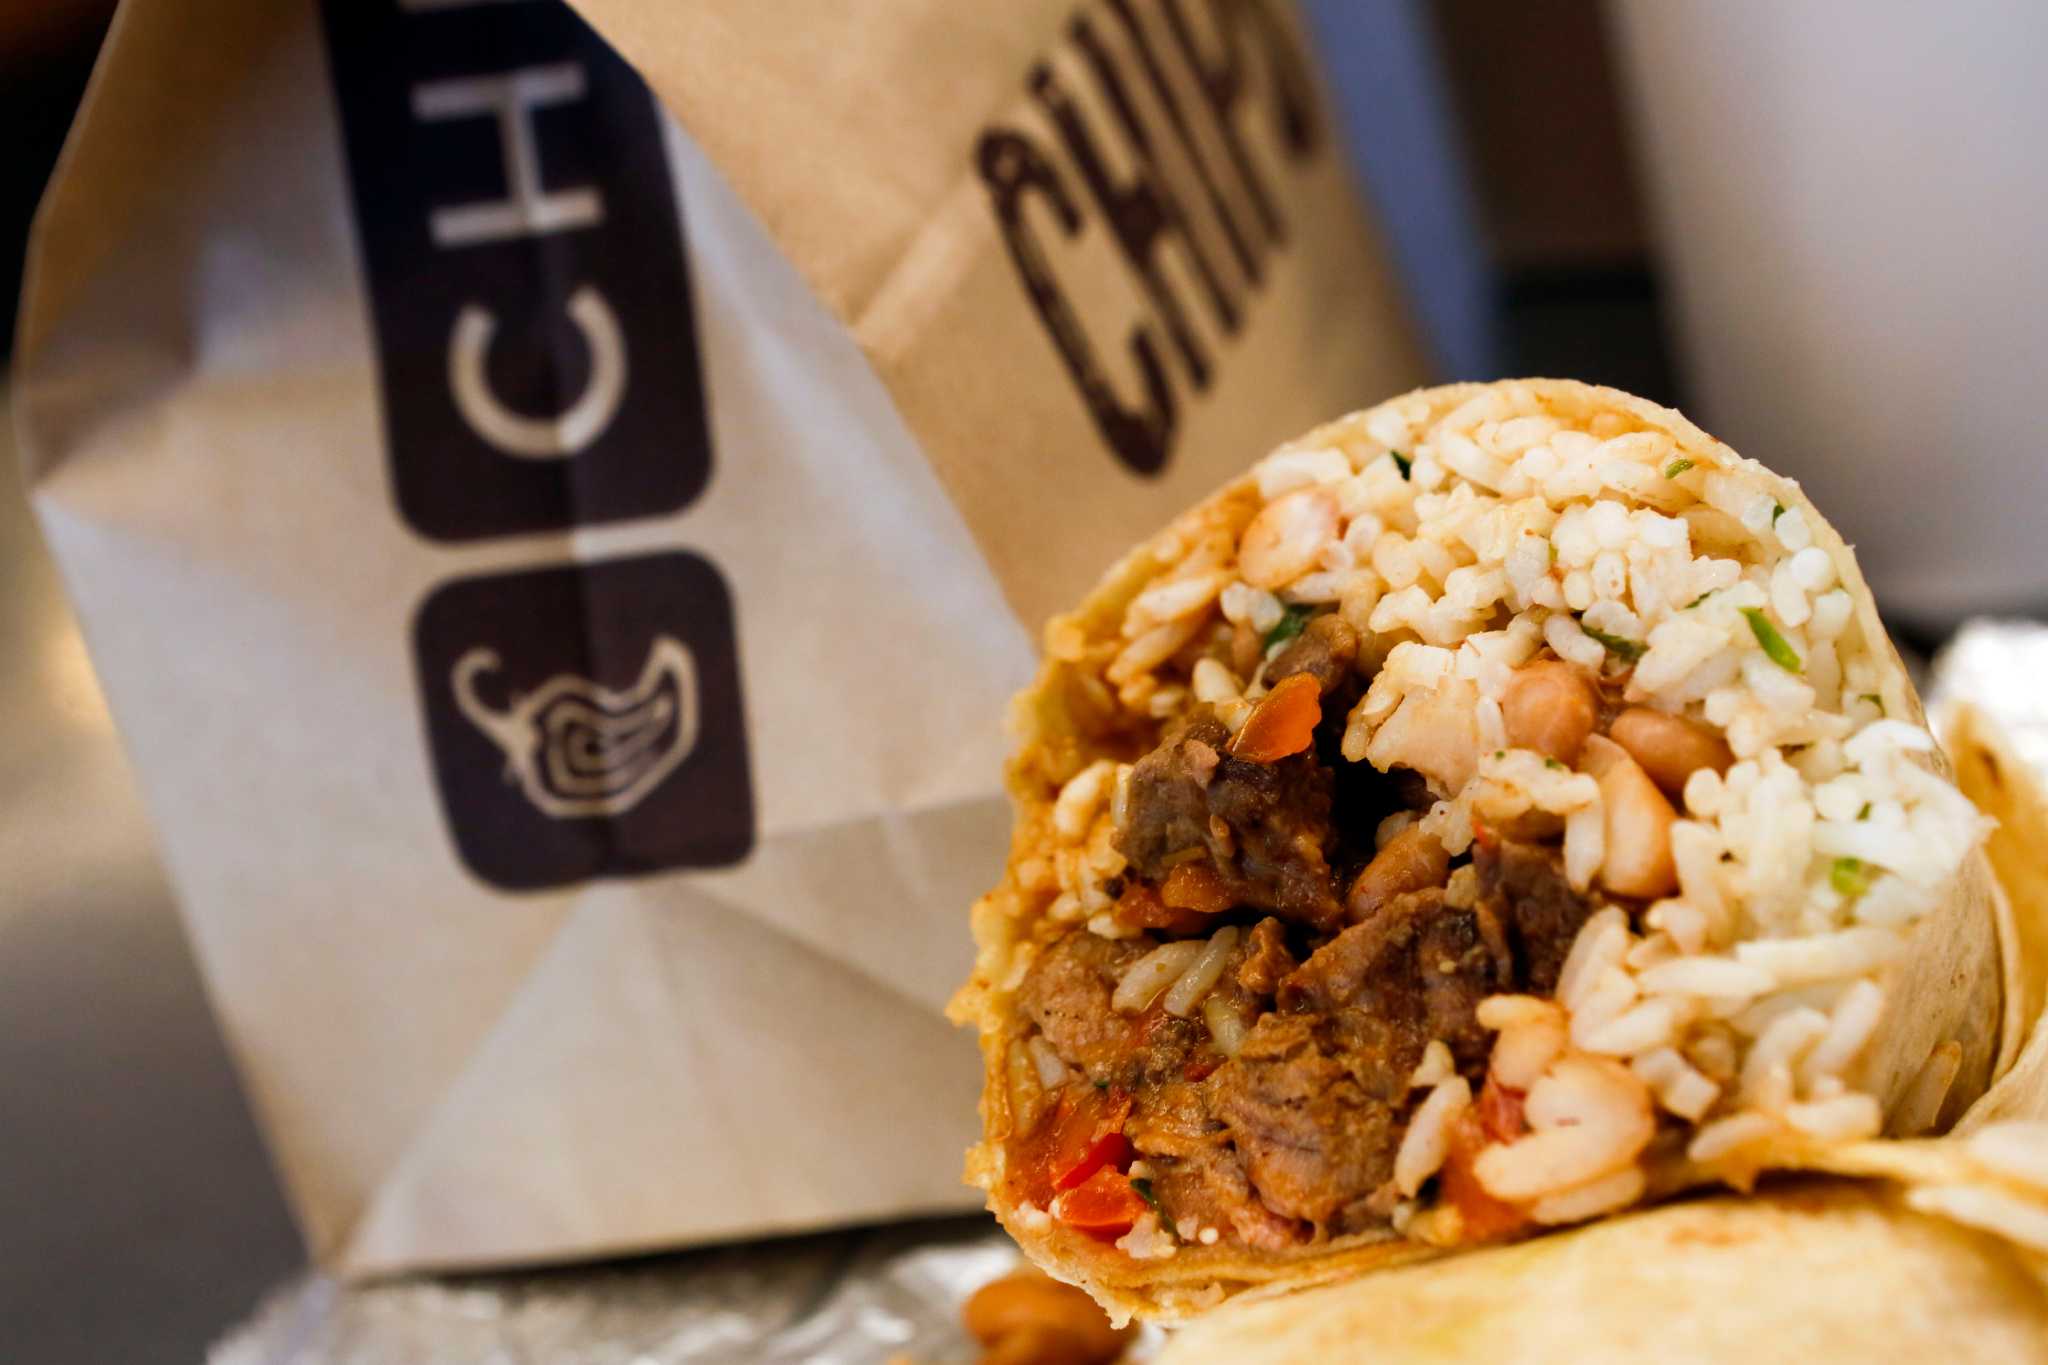 Slideshow: New menu items from Taco Bell, Culver's and Sonic Drive-In